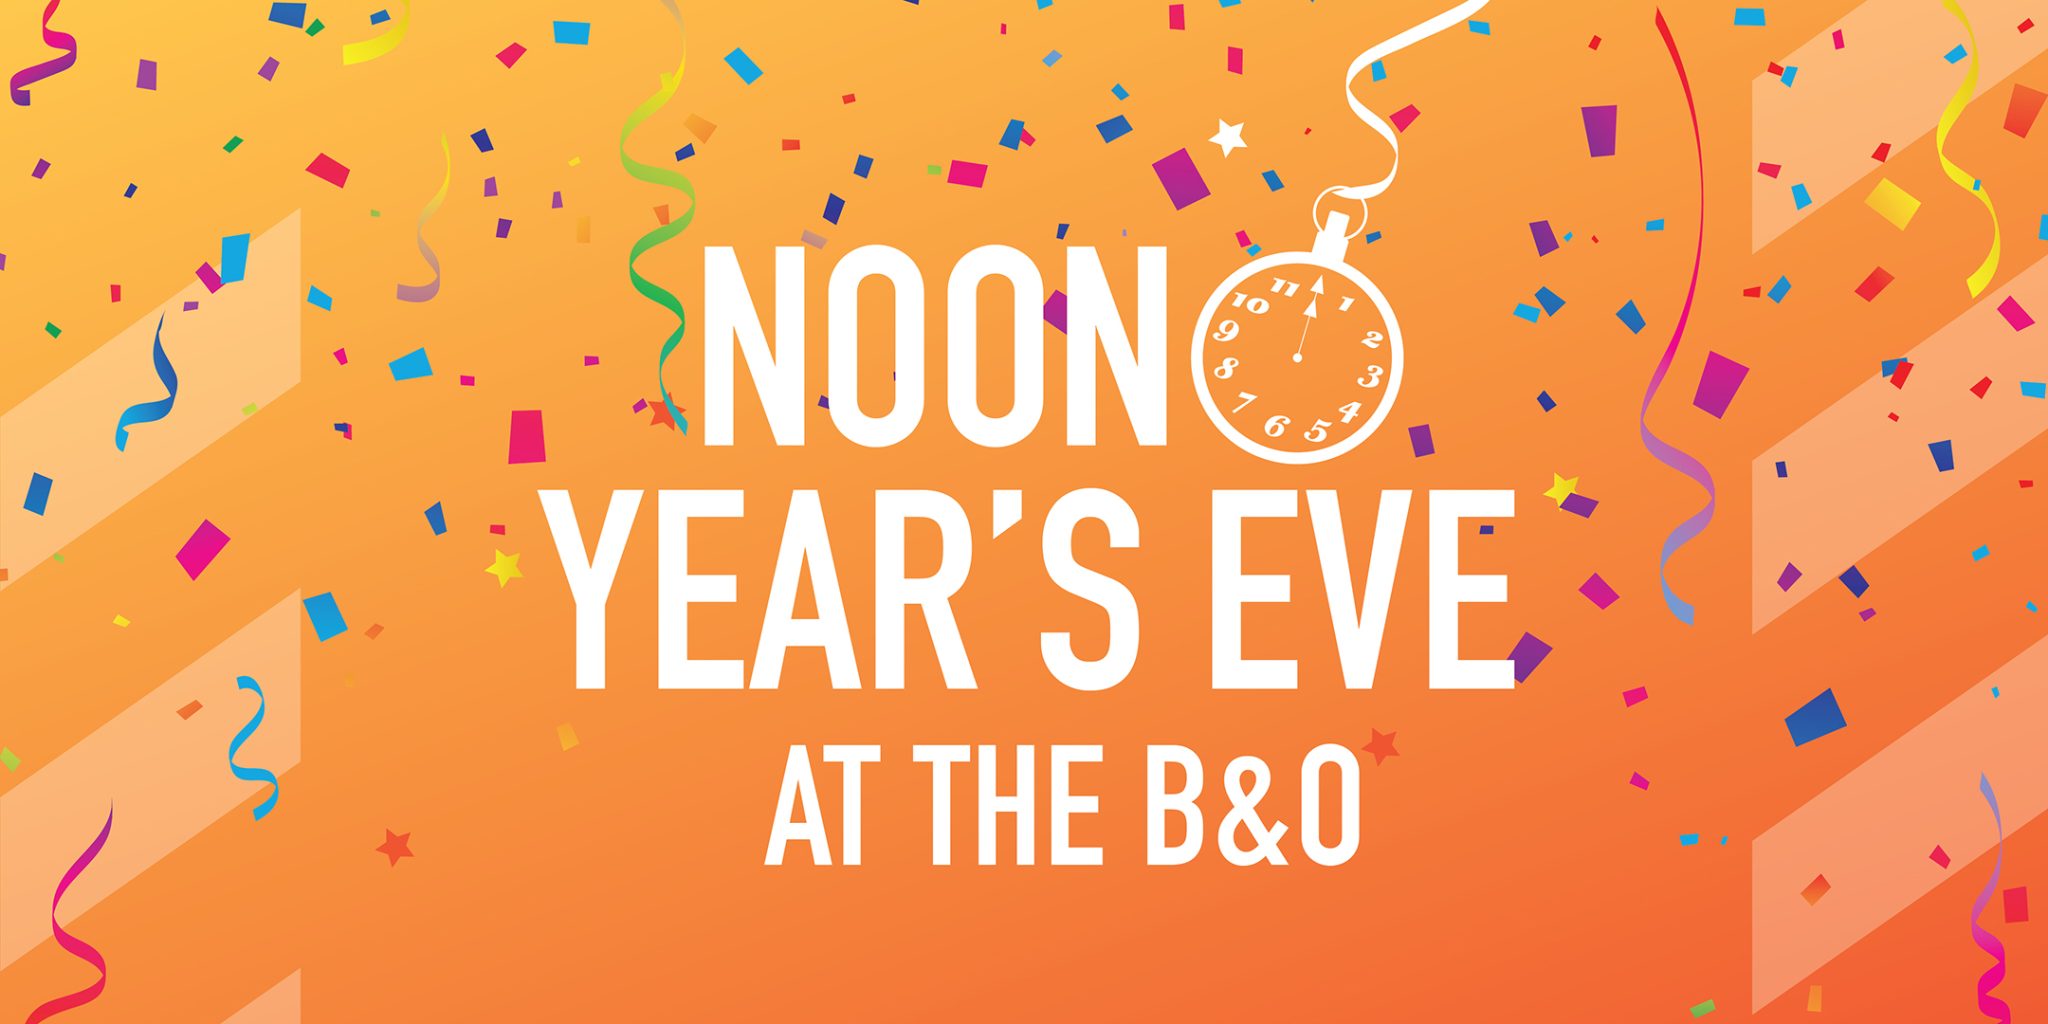 Noon Year's Eve B&O Railroad Museum